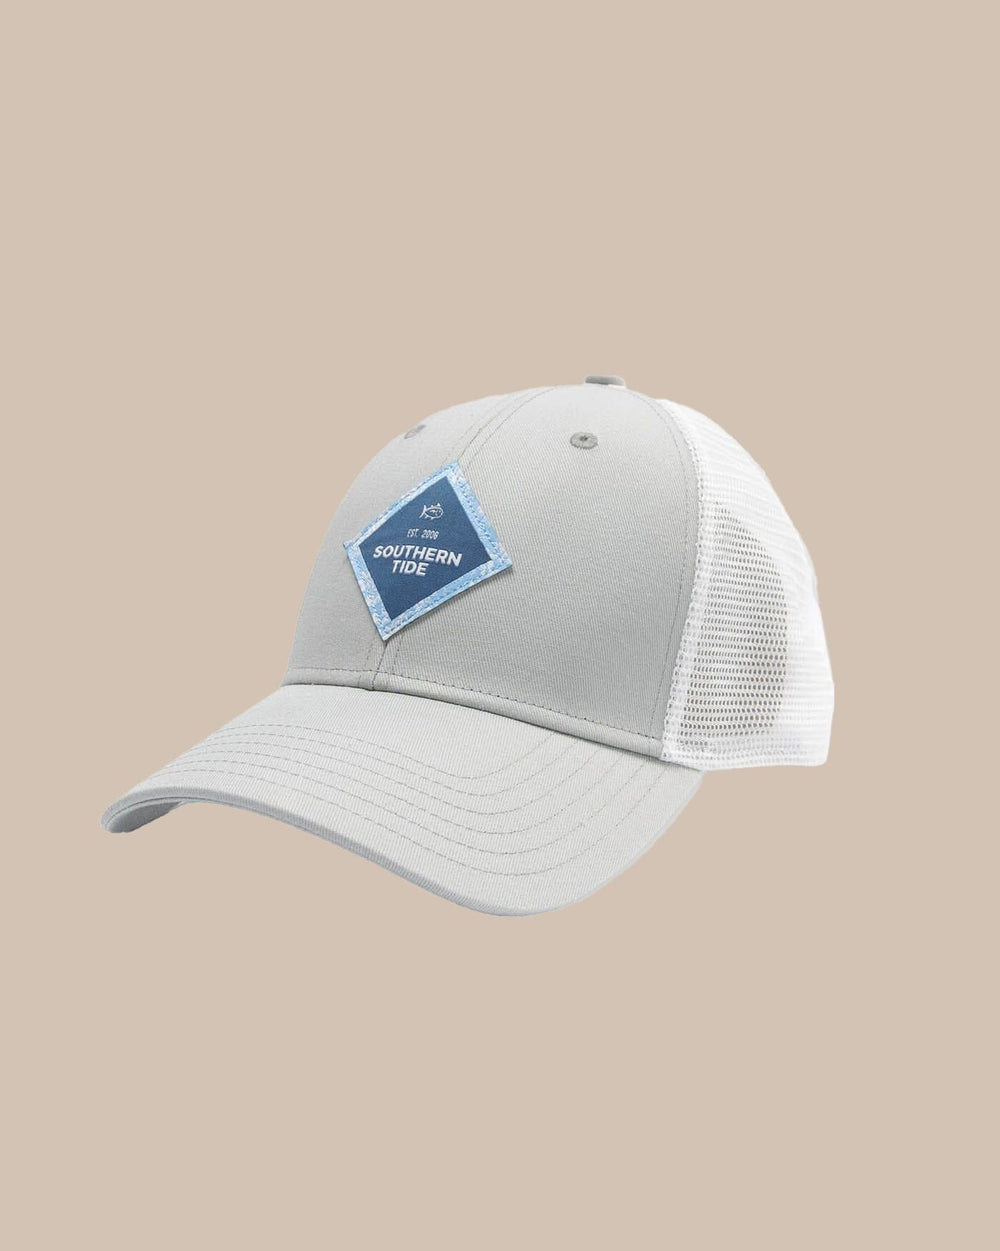 The front view of the Southern Tide Island Blooms Trucker Hat by Southern Tide - Light Grey